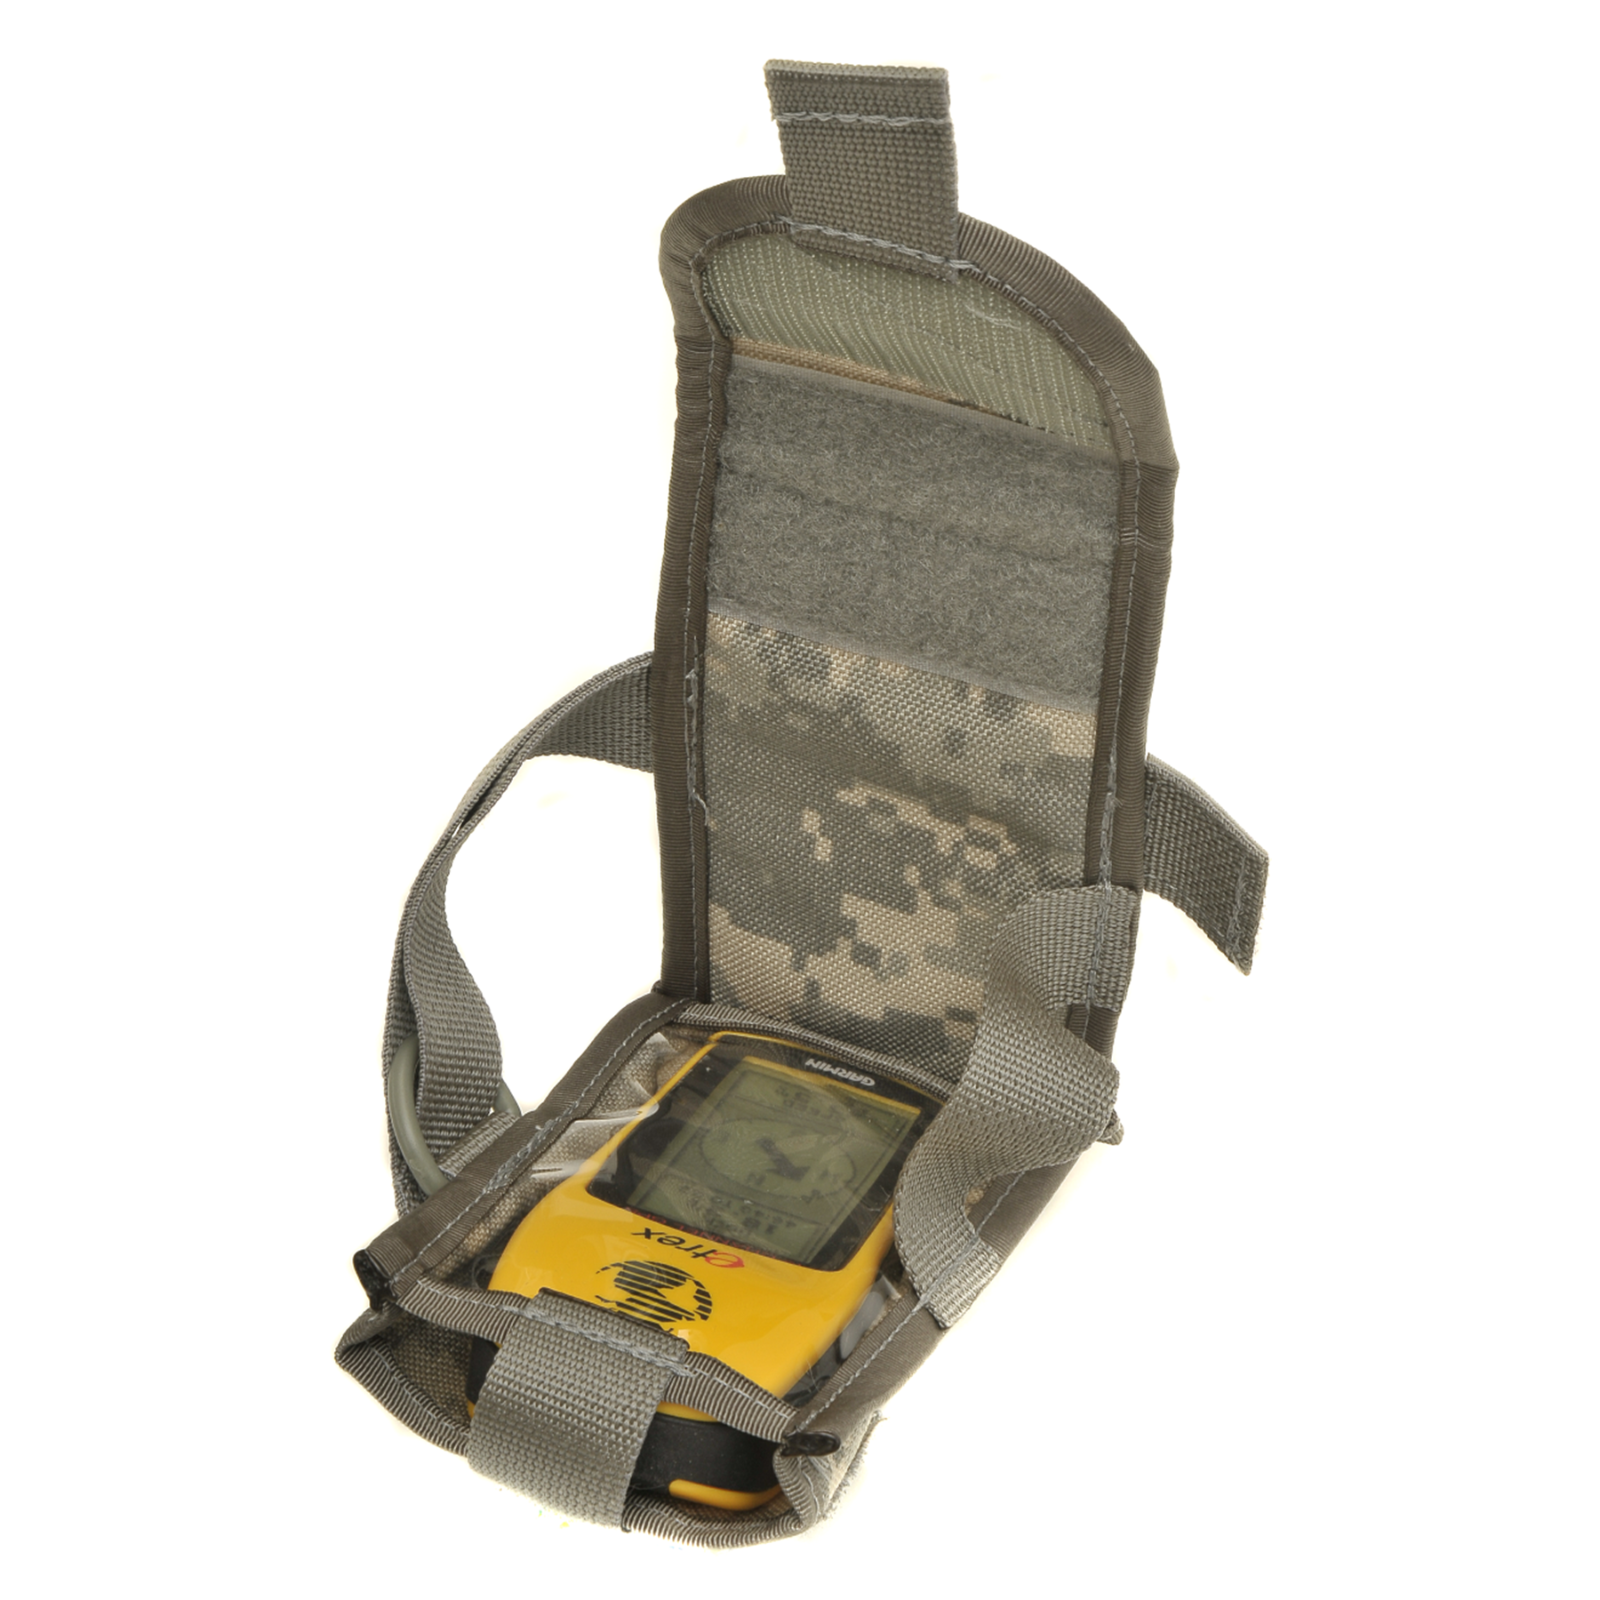 GPS Pouch With Loop and MOLLE Compatible Small Version 725838527177 | eBay